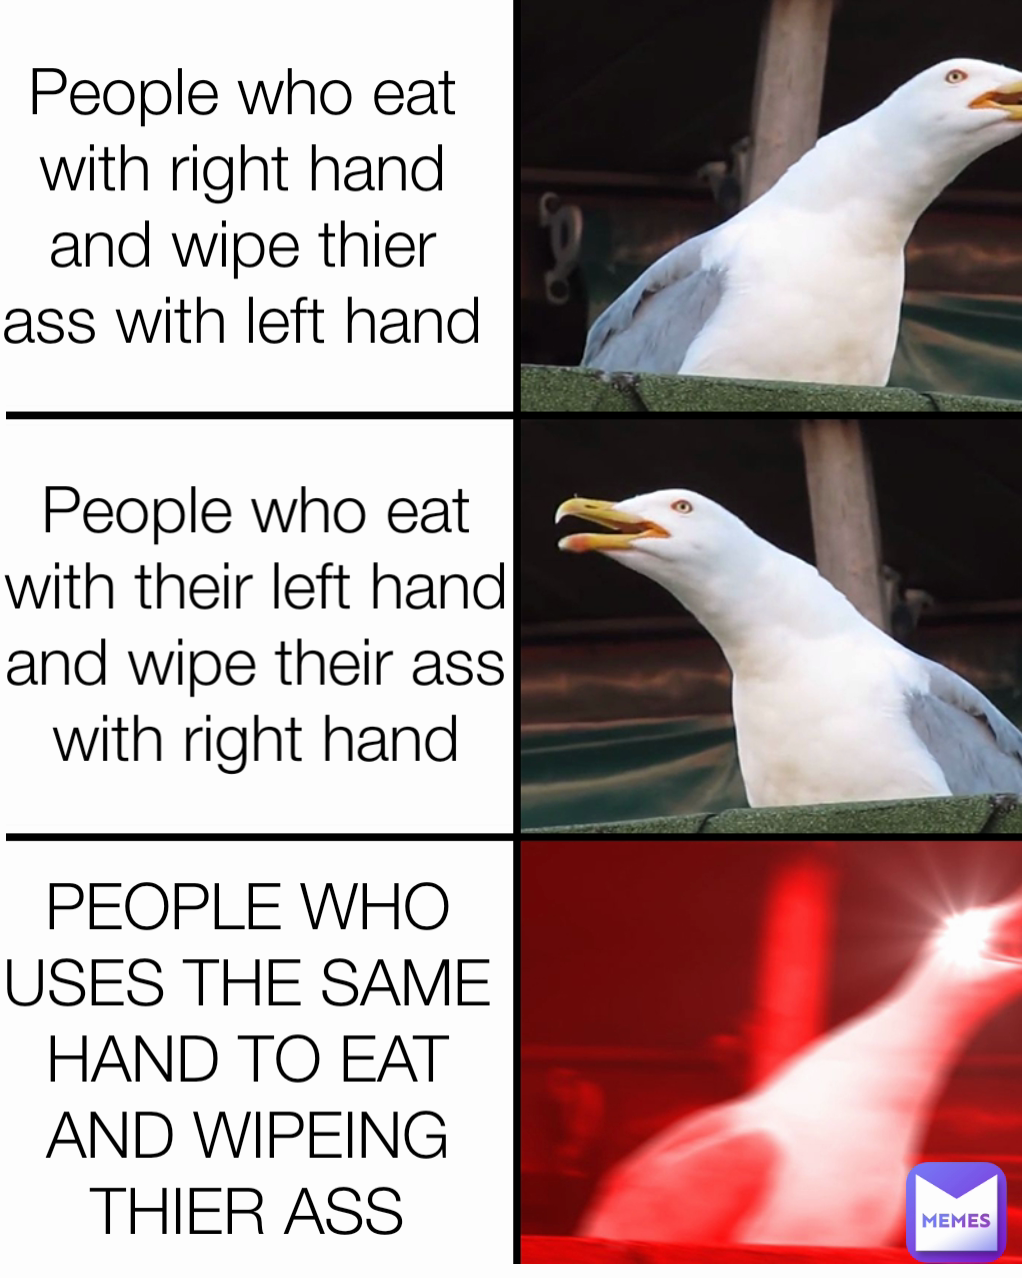 People who eat with right hand and wipe thier ass with left hand
 People who eat with their left hand and wipe their ass with right hand PEOPLE WHO USES THE SAME HAND TO EAT AND WIPEING THIER ASS